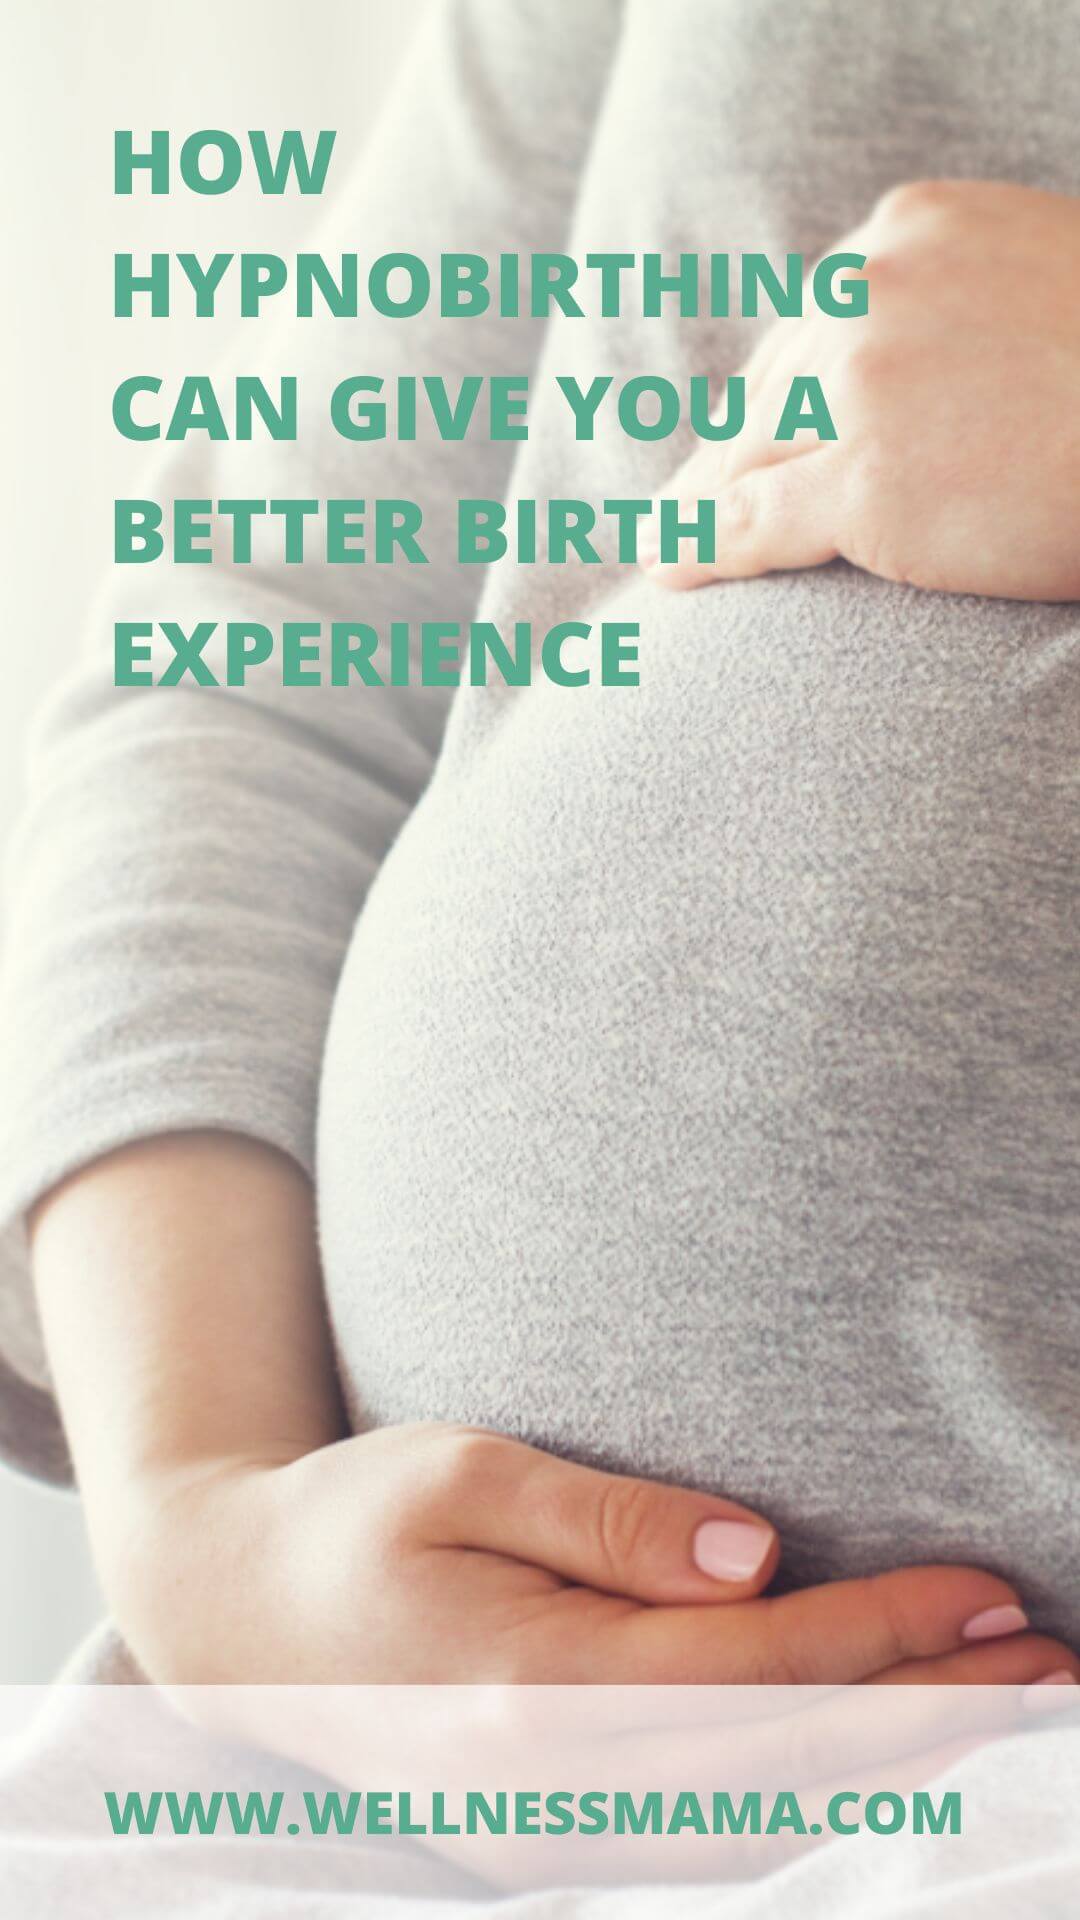 Hypnobirthing For a Better Birth